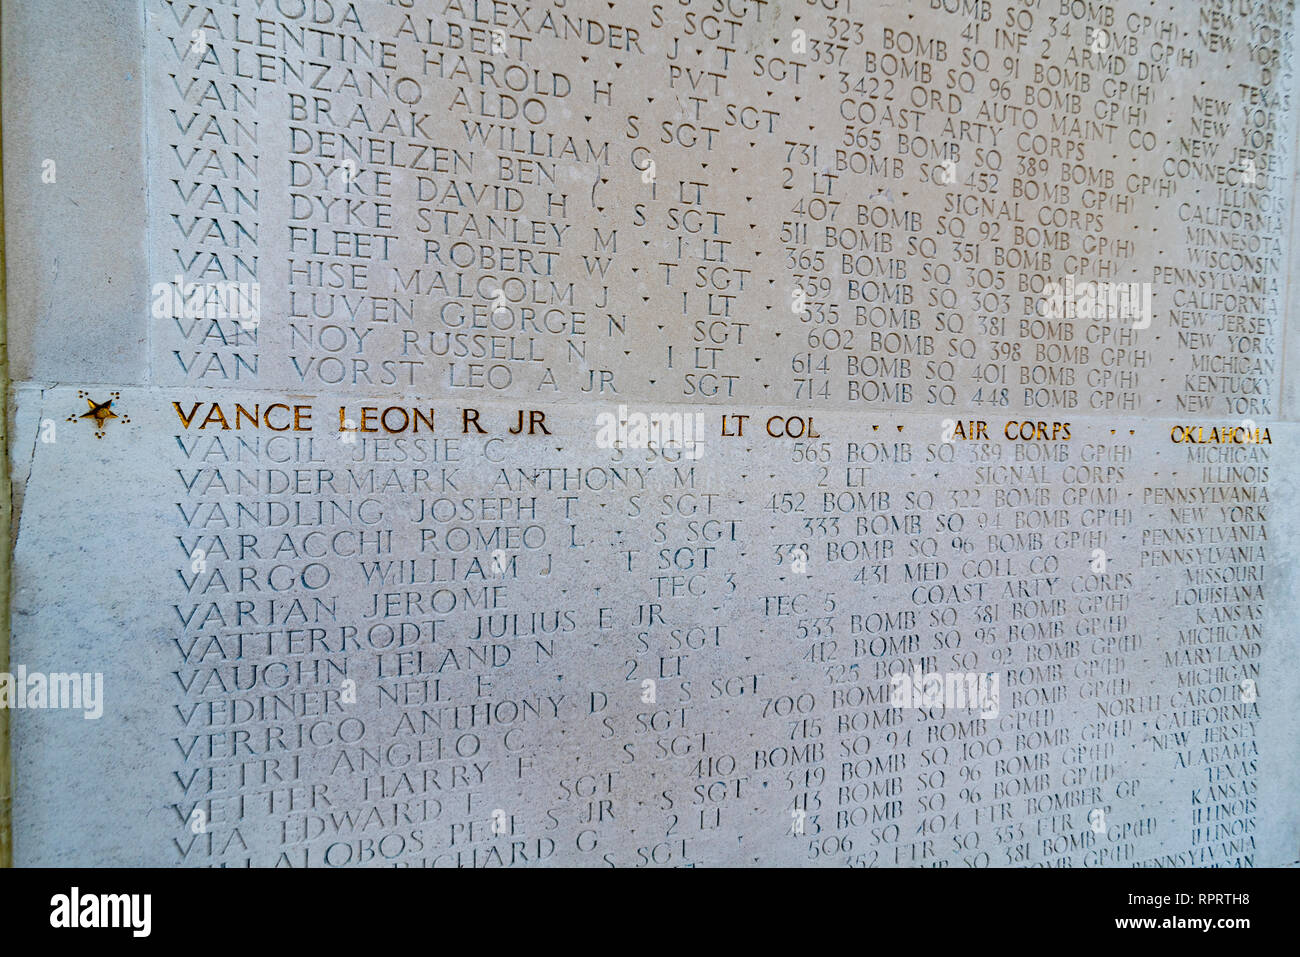 Wall of the Missing. Leon Vance. Cambridge American Cemetery near Madingley, Cambridgeshire, UK. Thousands of US servicemen missing in action Stock Photo